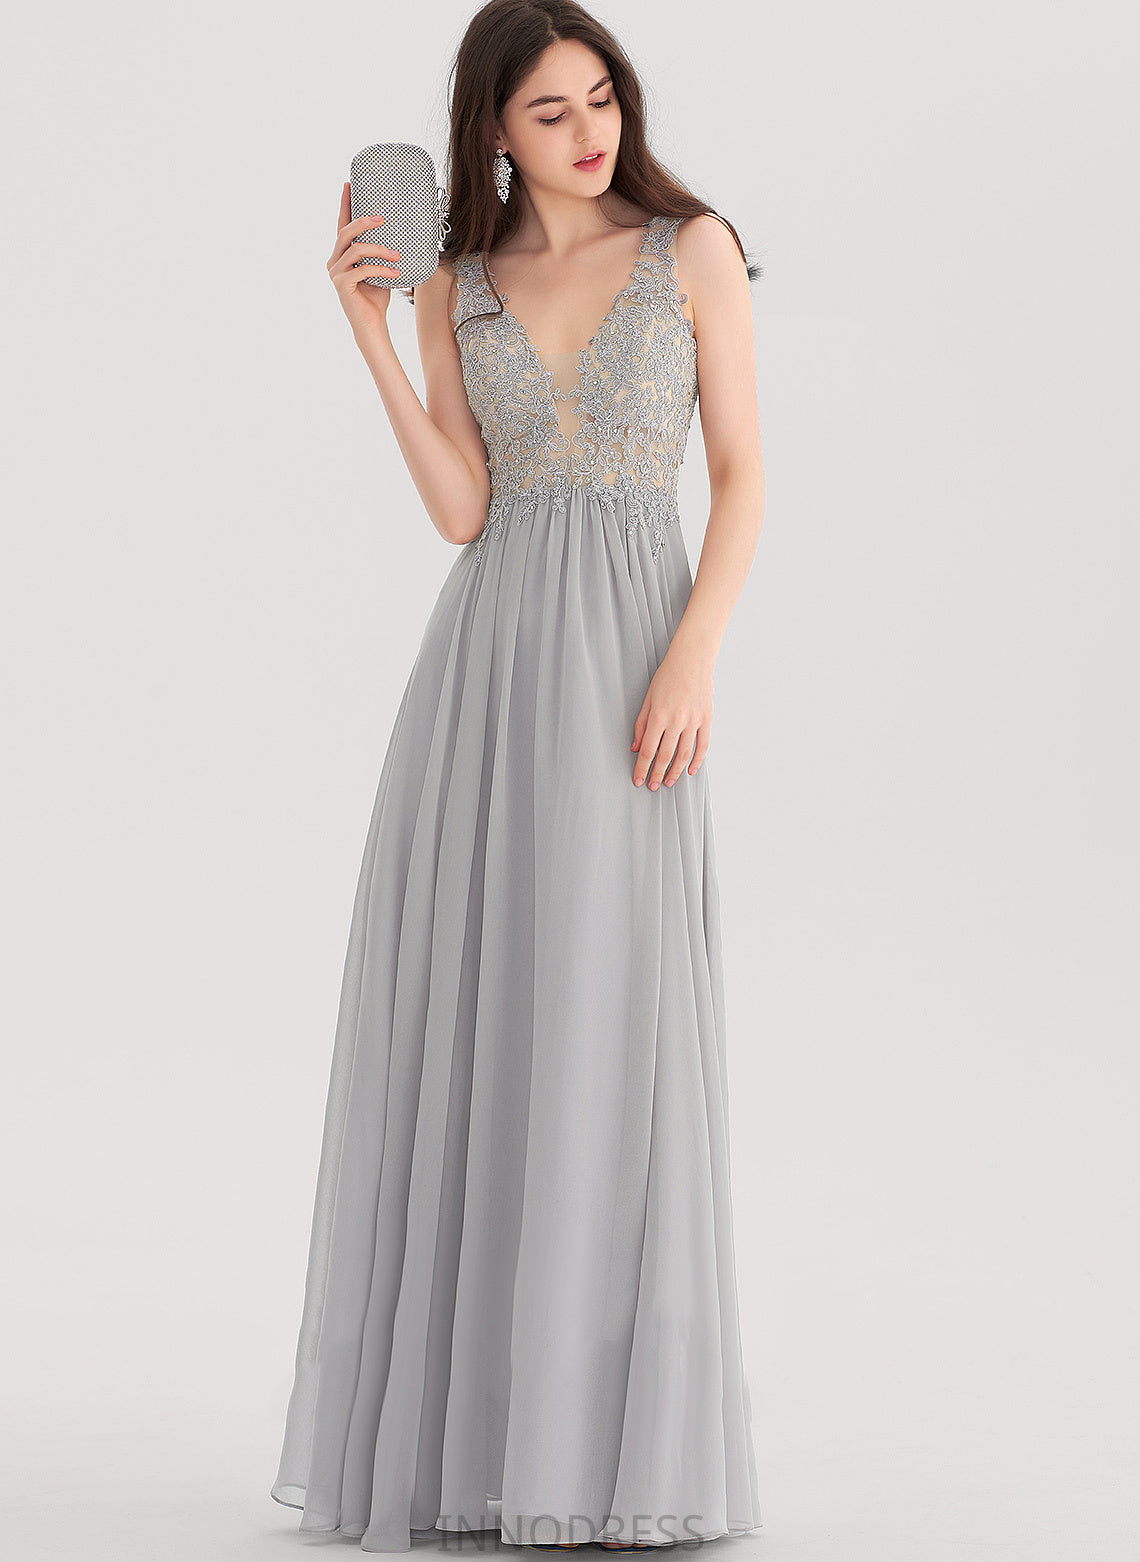 Prom Dresses Lace Dulce With Chiffon A-Line Rhinestone Floor-Length V-neck